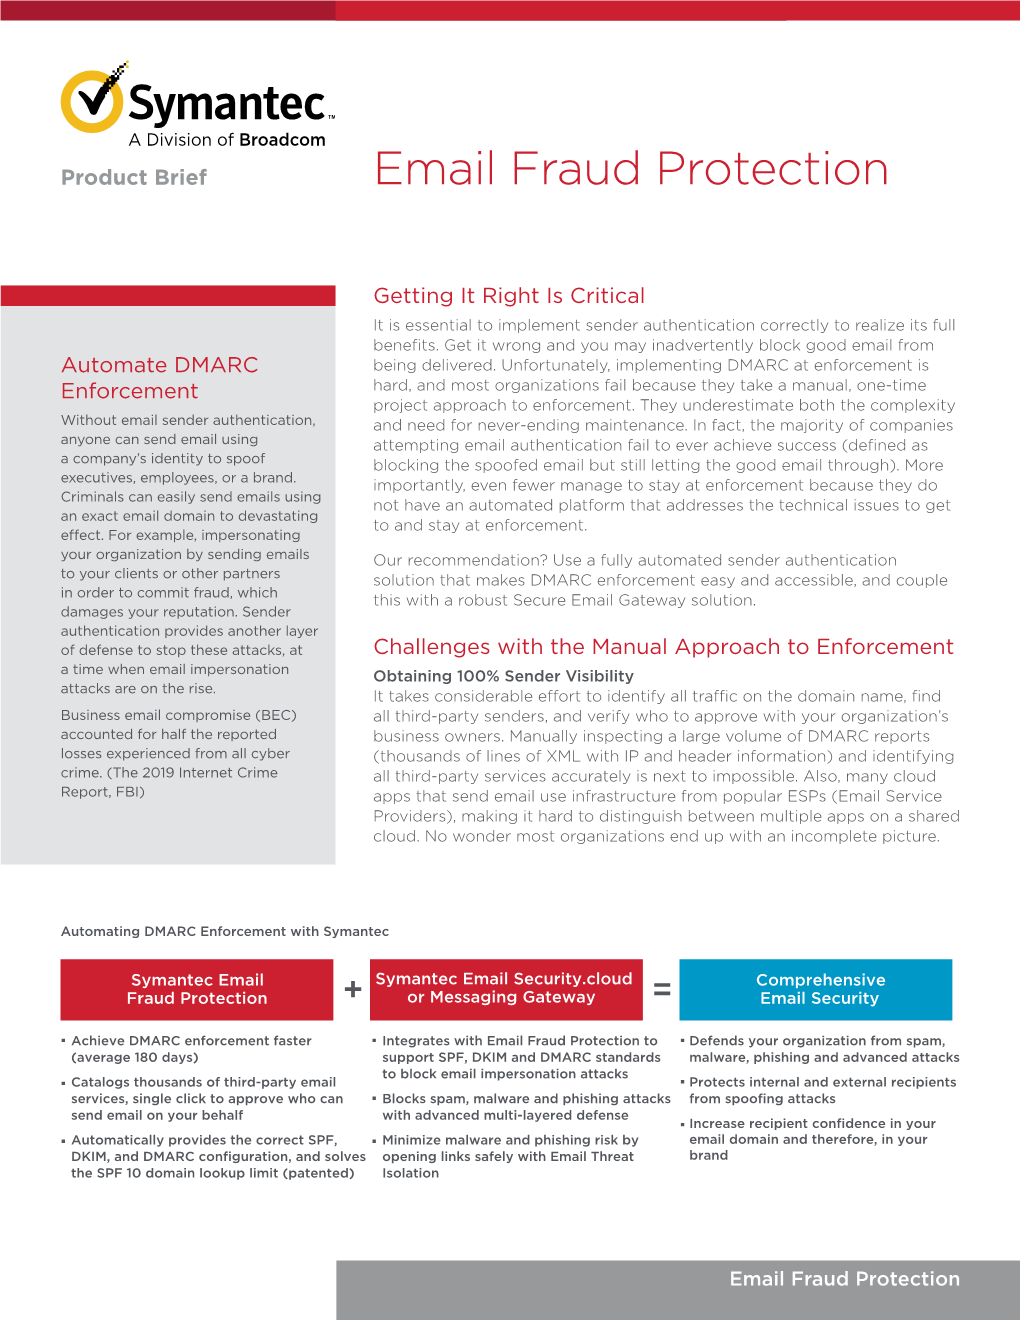 Symantec Email Fraud Protection Guides Customers SPF, Most Organizations Cannot Manually Overcome Along a Journey to Email Authentication Enforcement